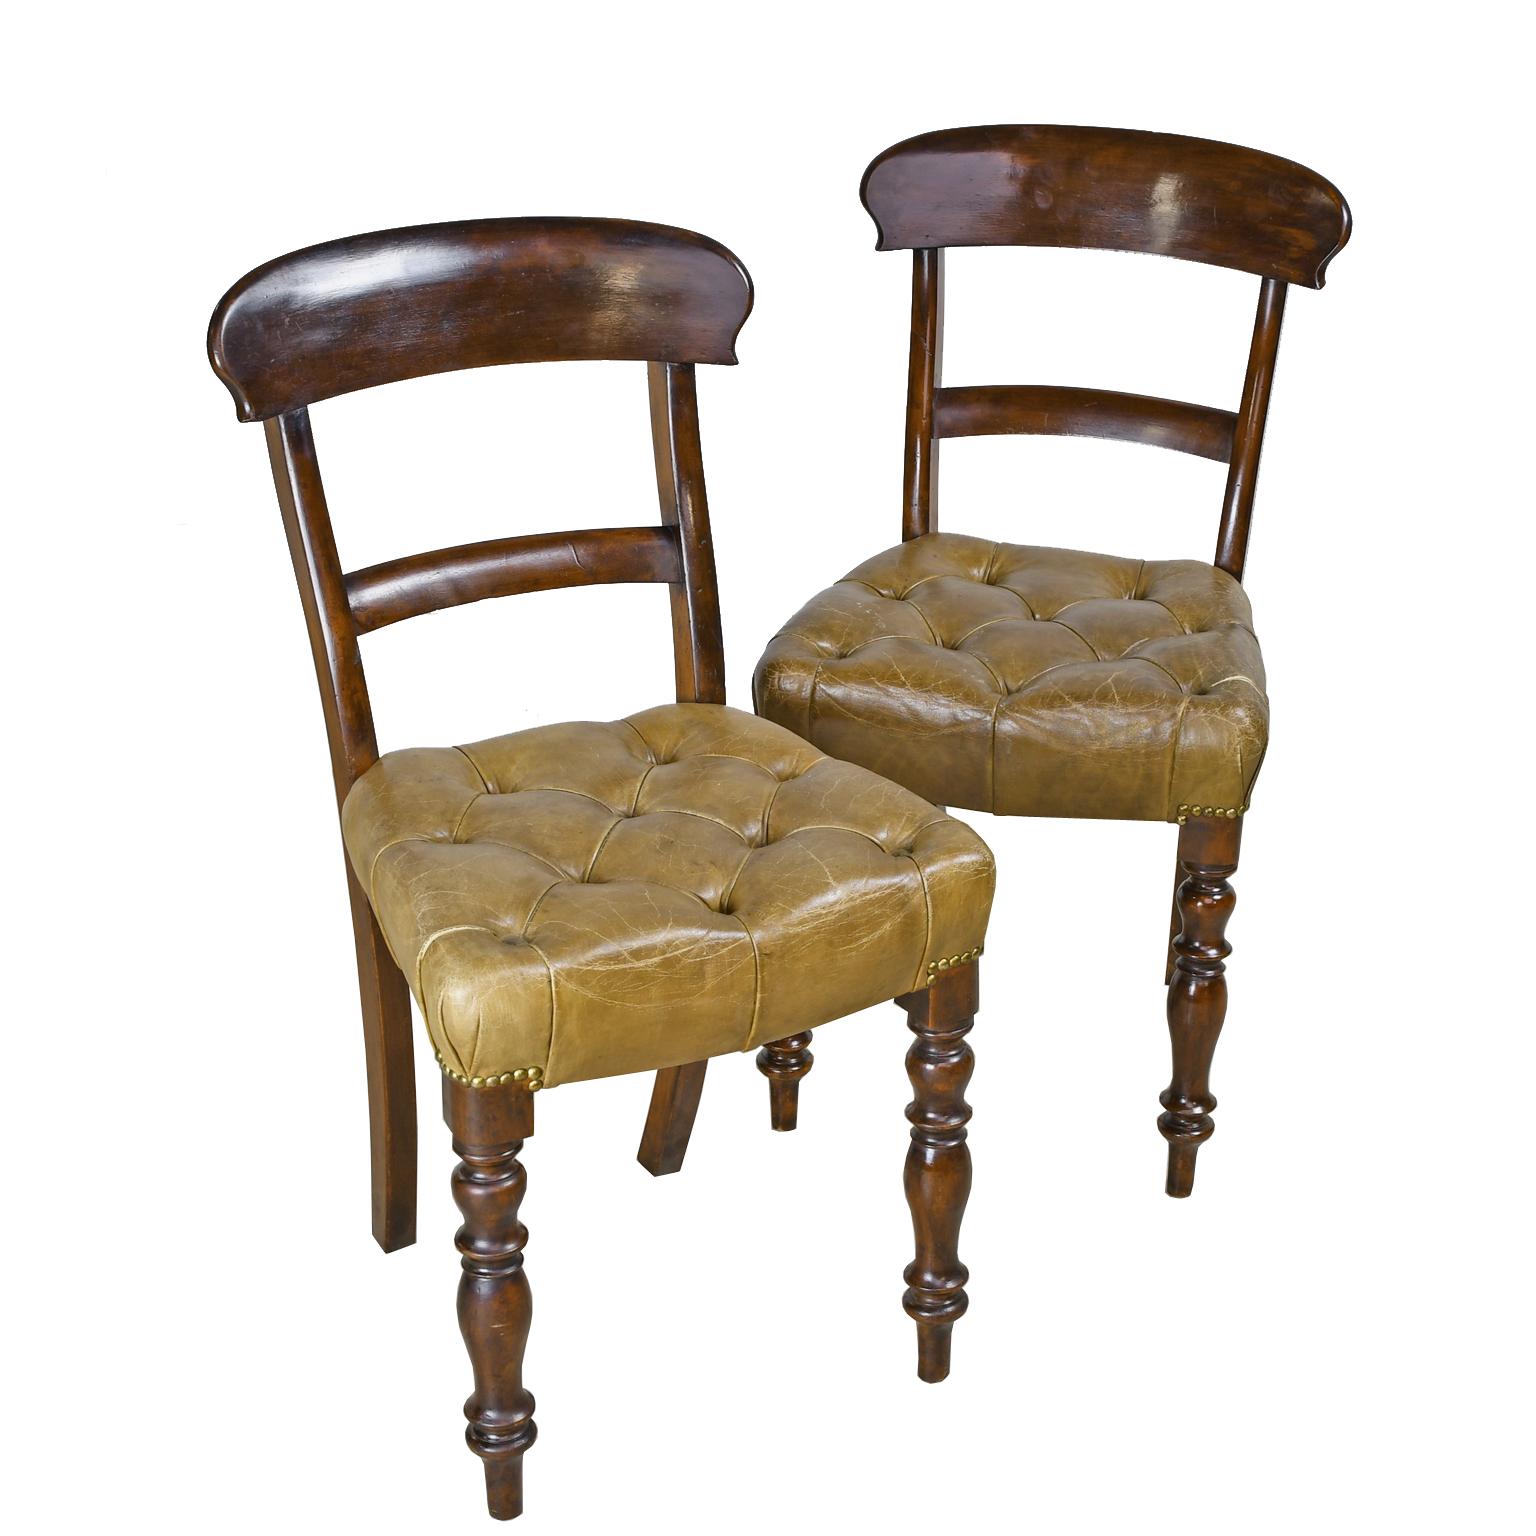 Pair of Early Victorian Mahogany Chairs with Leather Upholstery, England 6